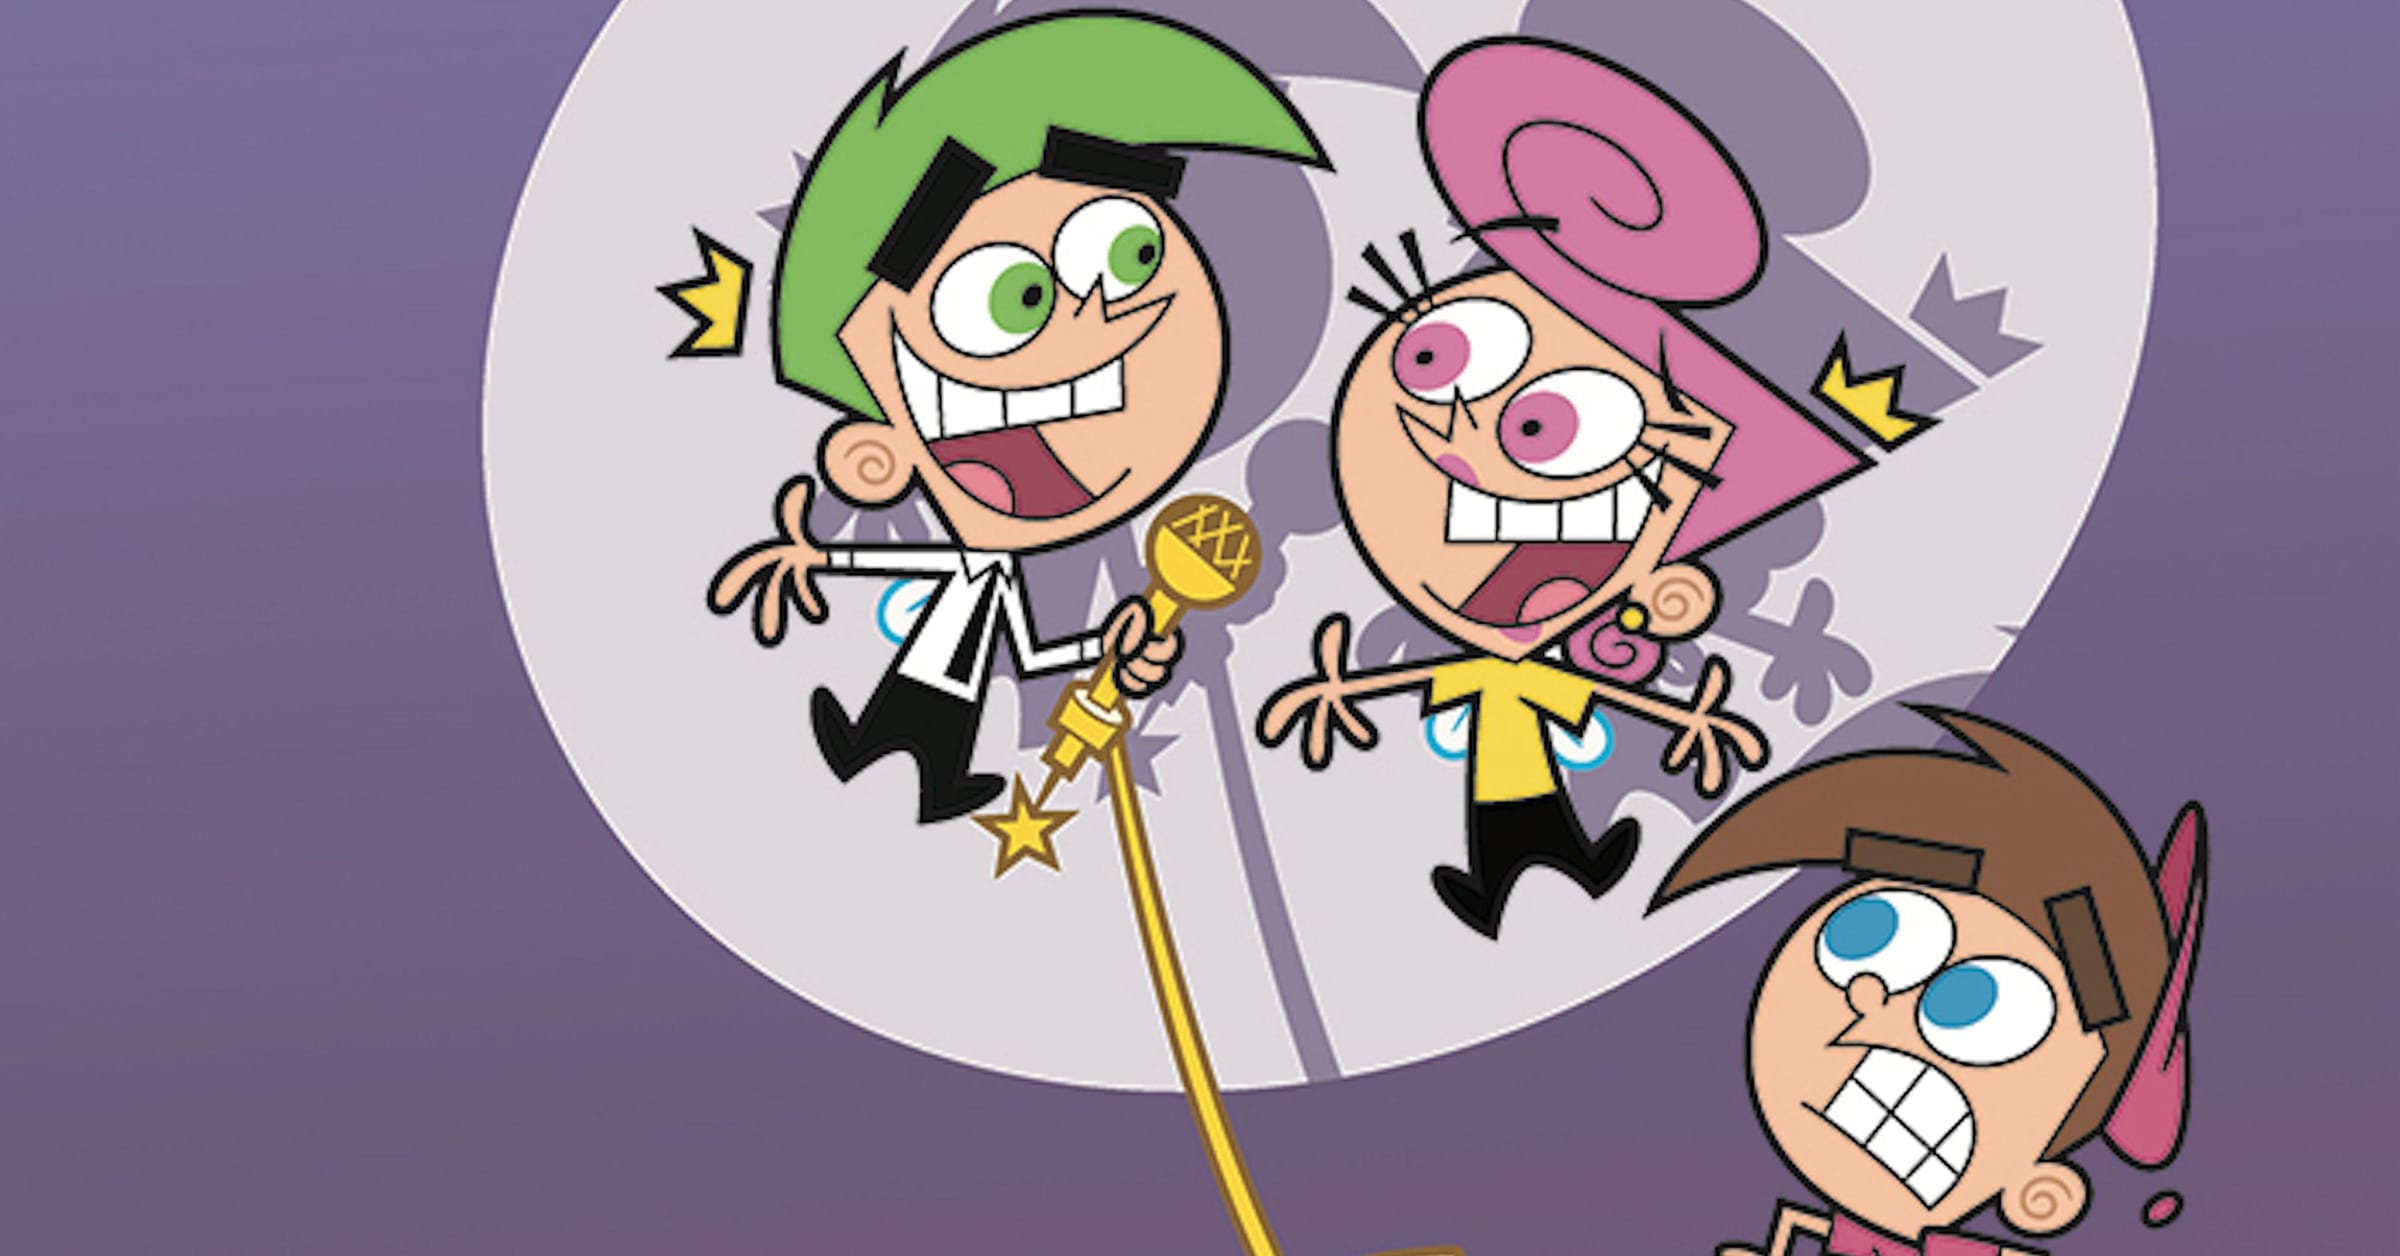 Fairly Oddparents Parents Porn - The Fairly OddParents' Fan Theories That Make A Lot Of Sense